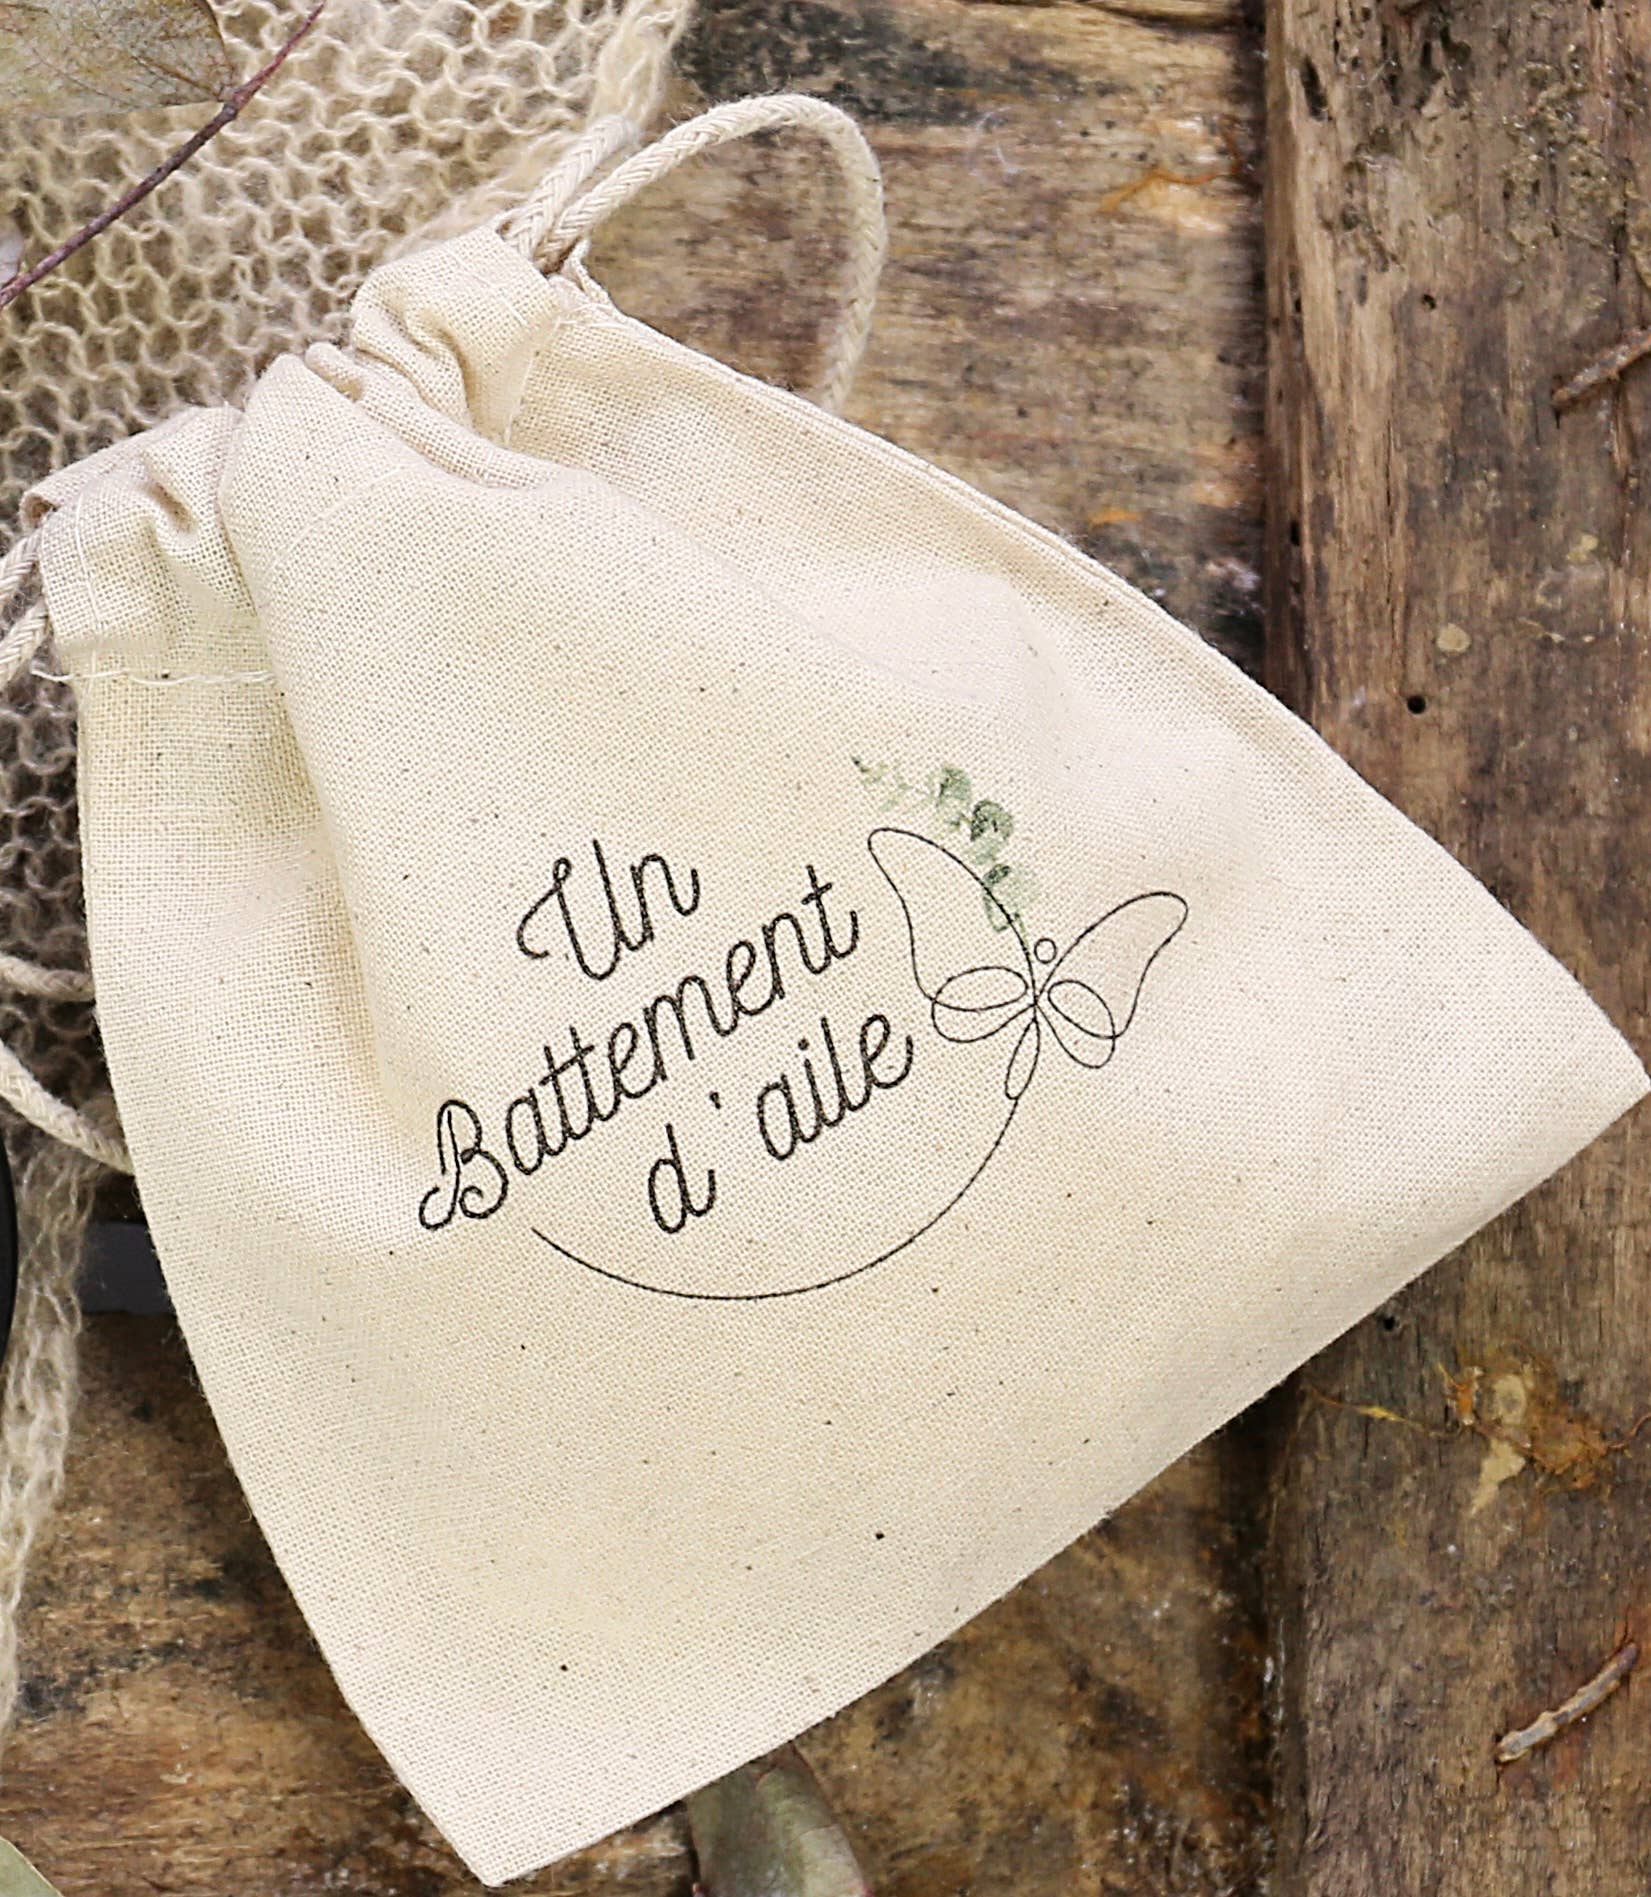 Small organic cotton bag for solid deodorant